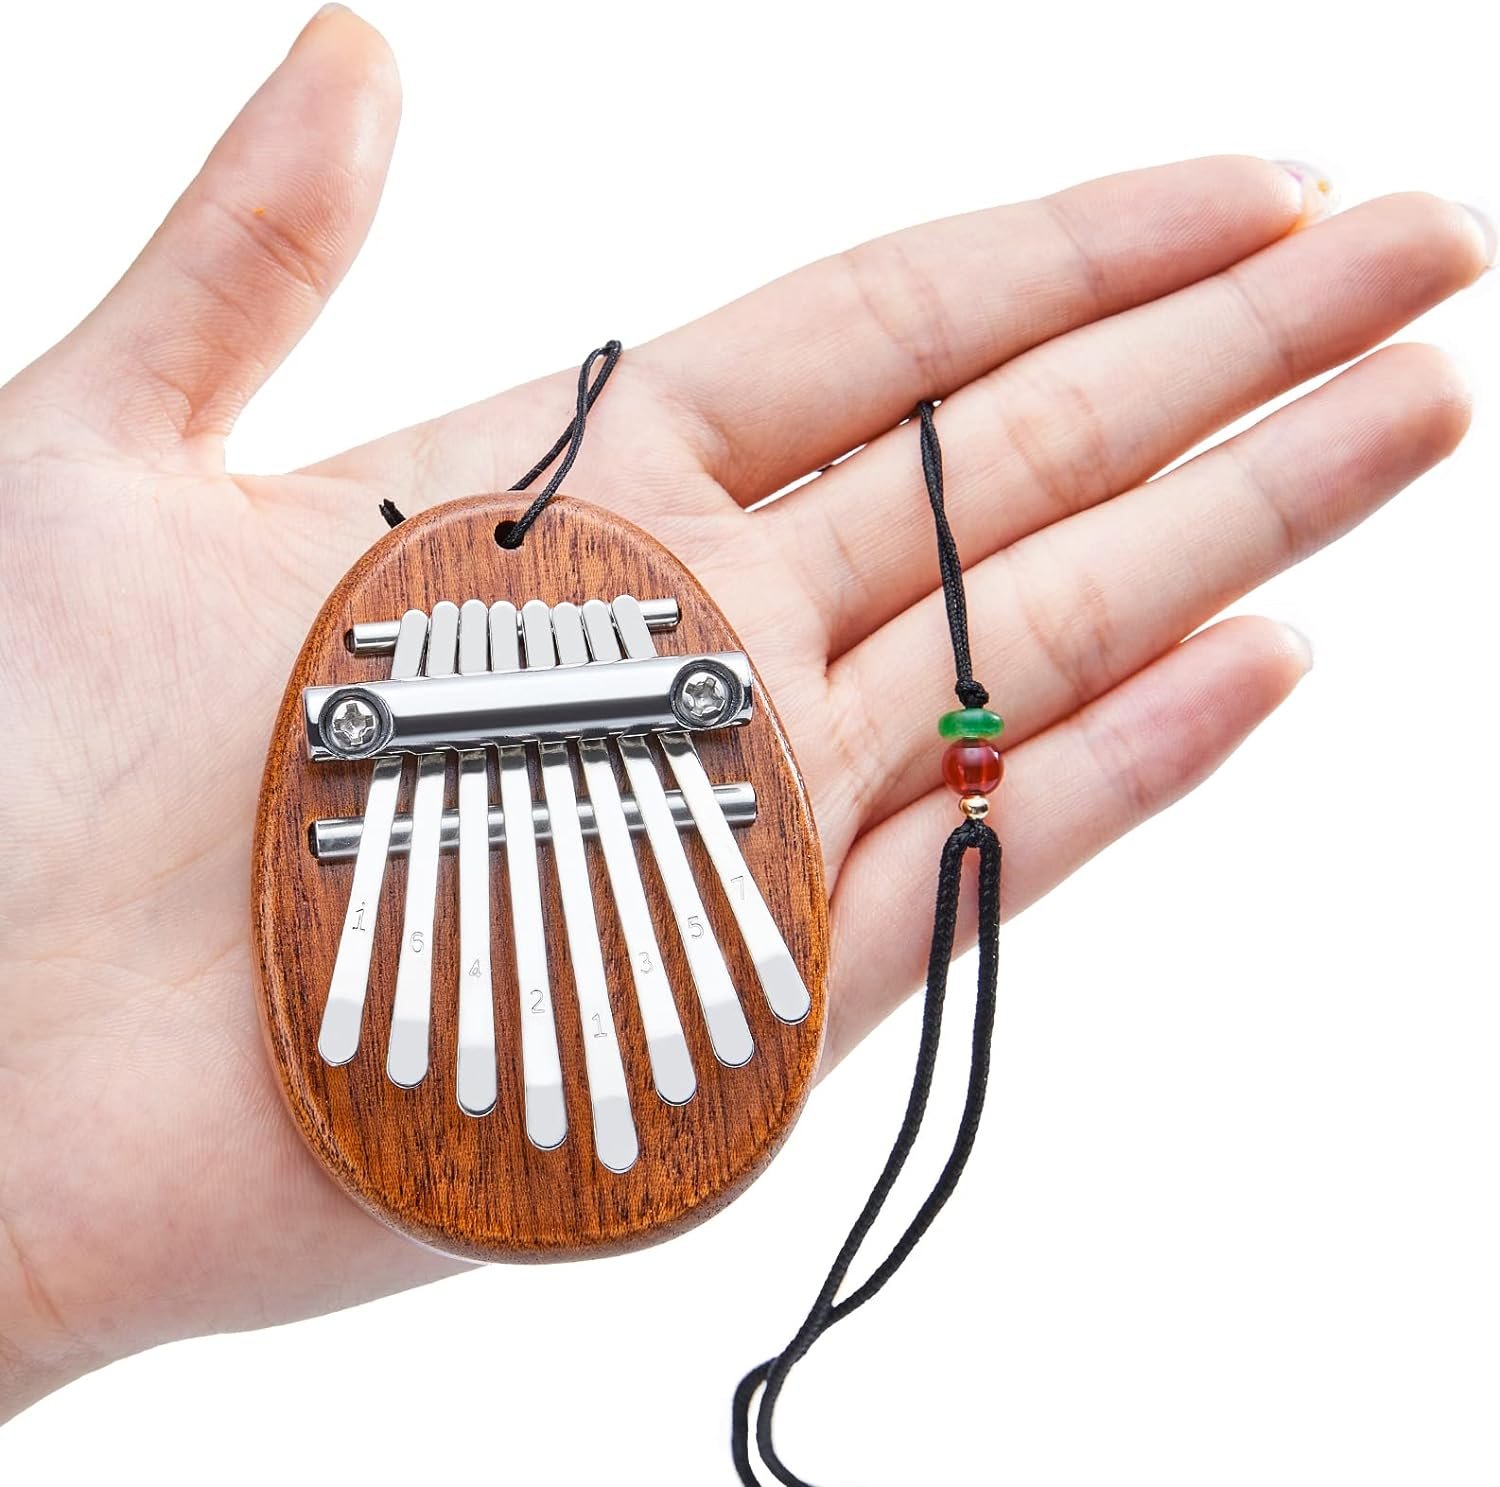 Lronbird Mini Kalimba 8 Key Exquisite Finger Thumb Piano Gifts for Beginners Music Lovers Players, Cute Instrument Pendant Keychain Accessories Miniature Things Ornament for Christmas Tree (Oval)